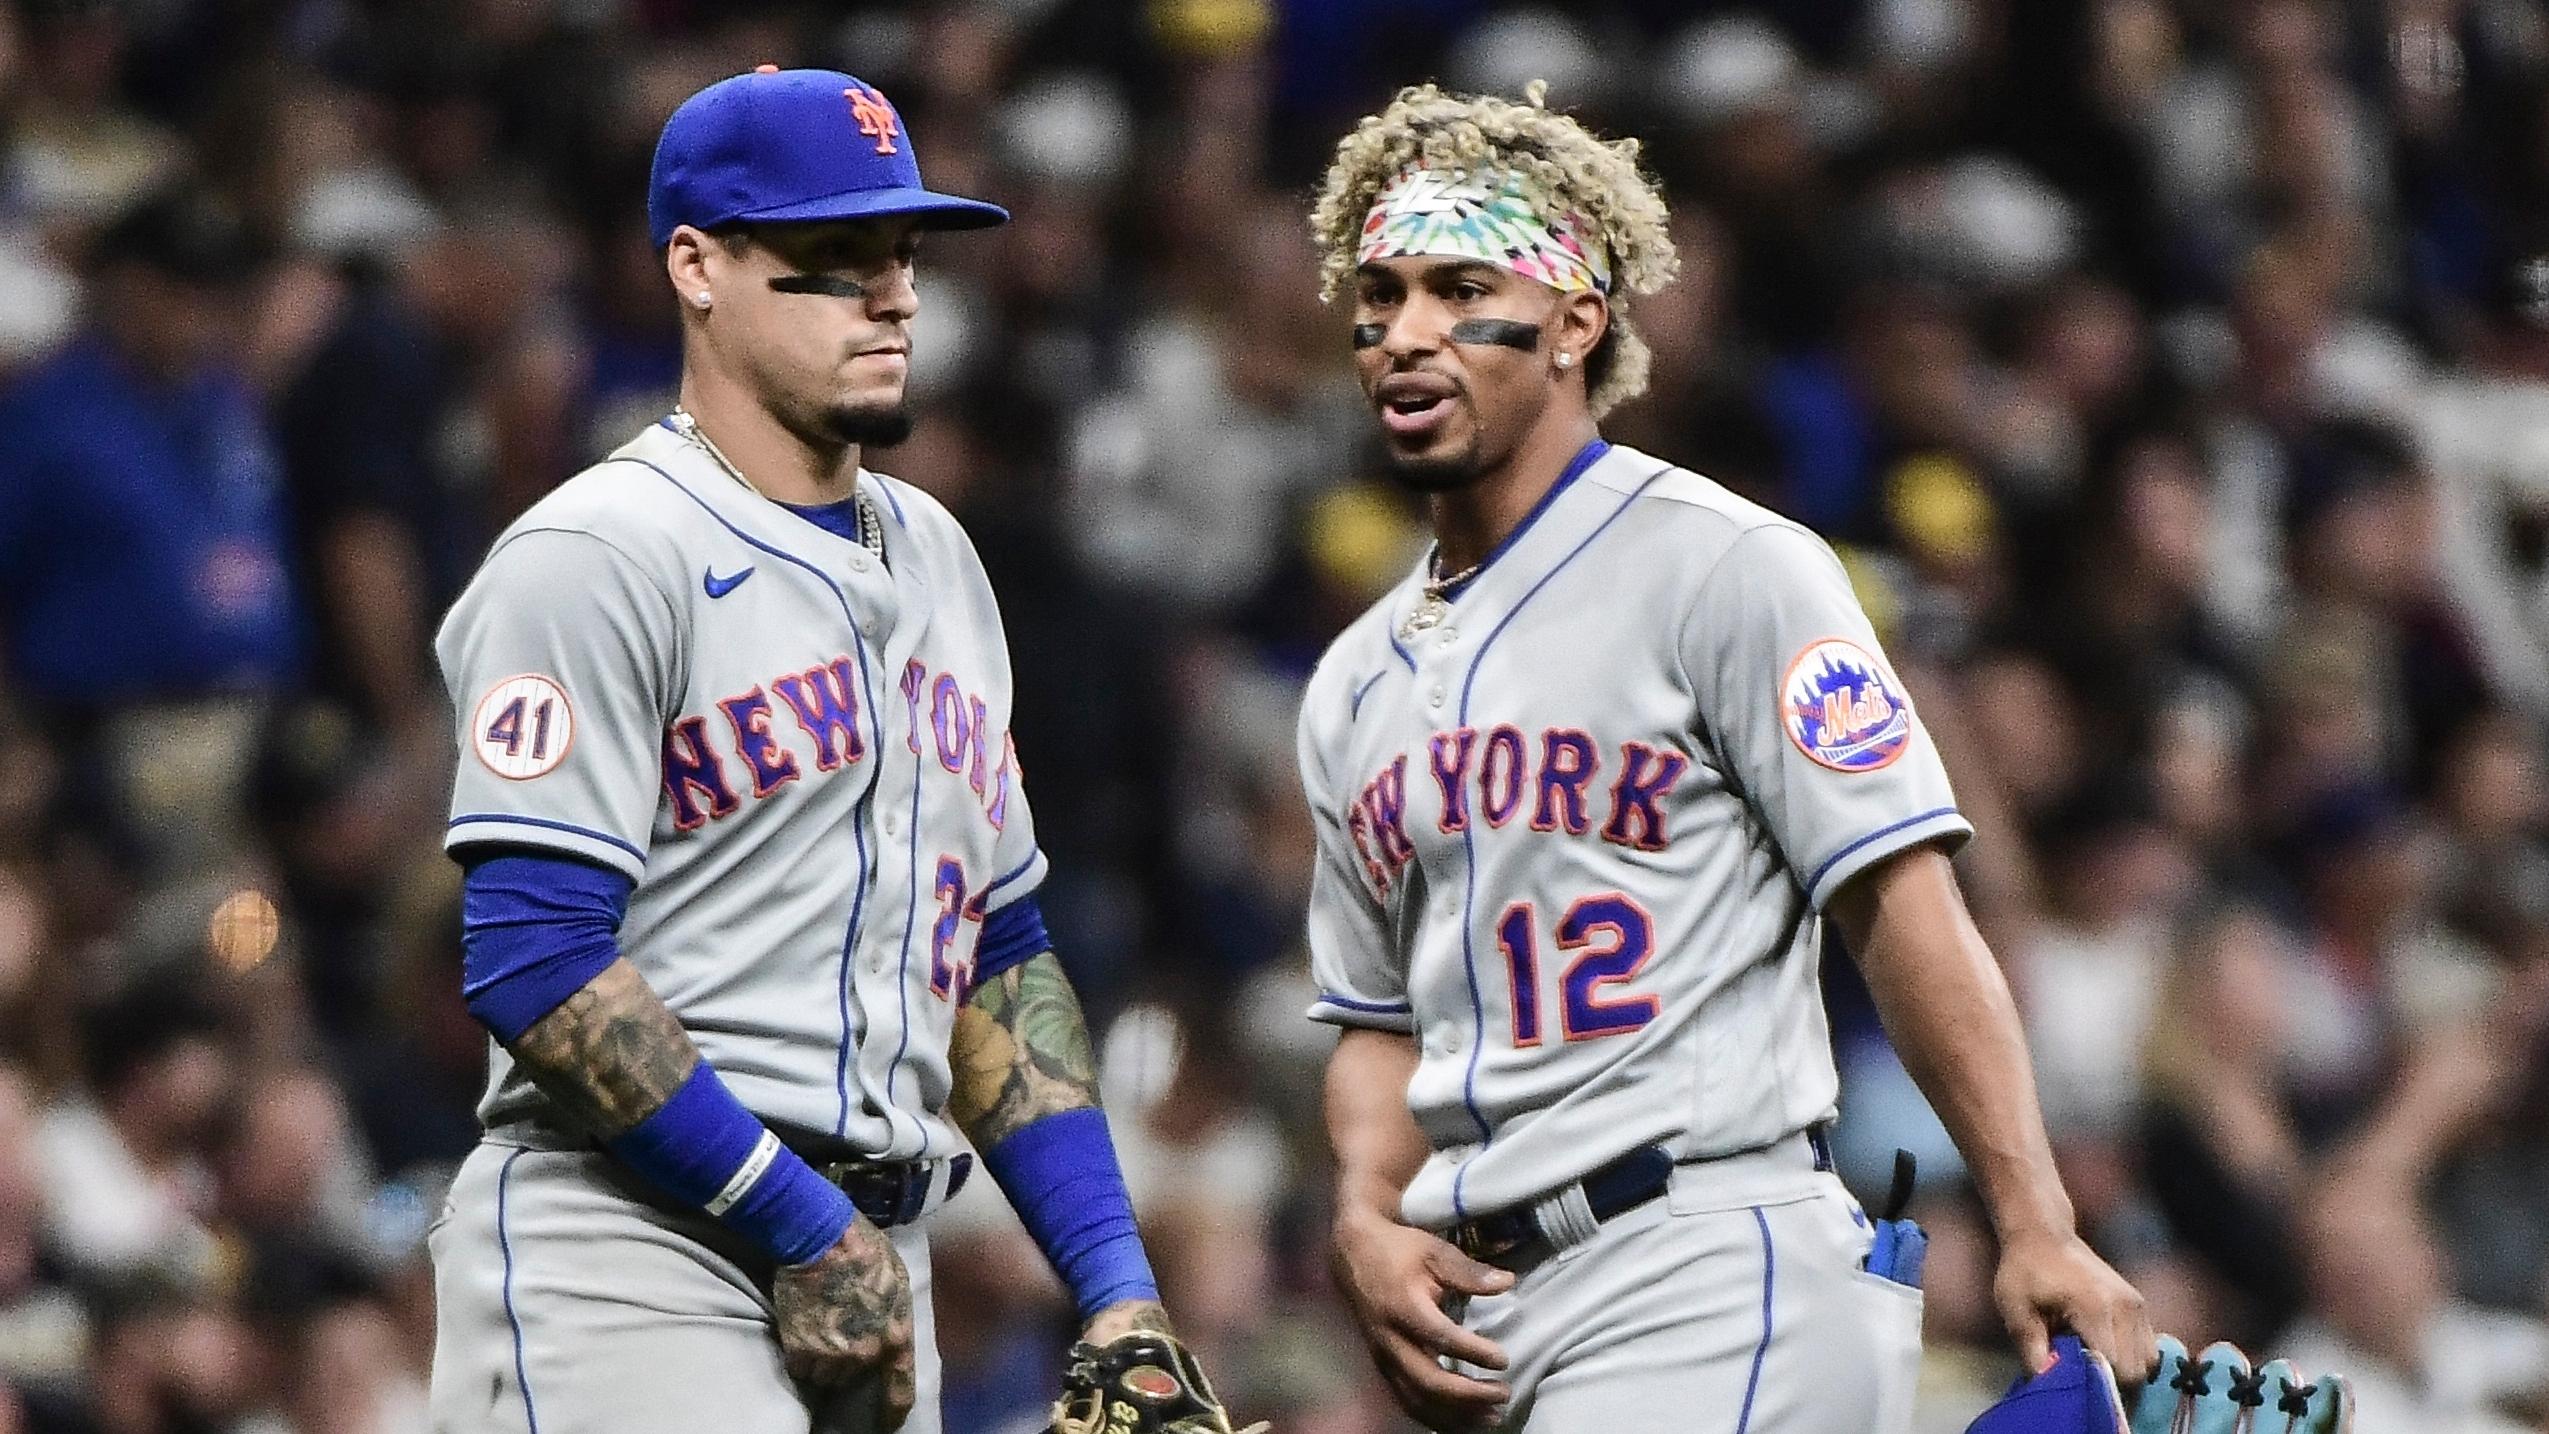 New York Mets shortstop Francisco Lindor (12) talks to second baseman Javier Baez (23) between inning during the game against the Milwaukee Brewers at American Family Field. / Benny Sieu - USA TODAY Sports